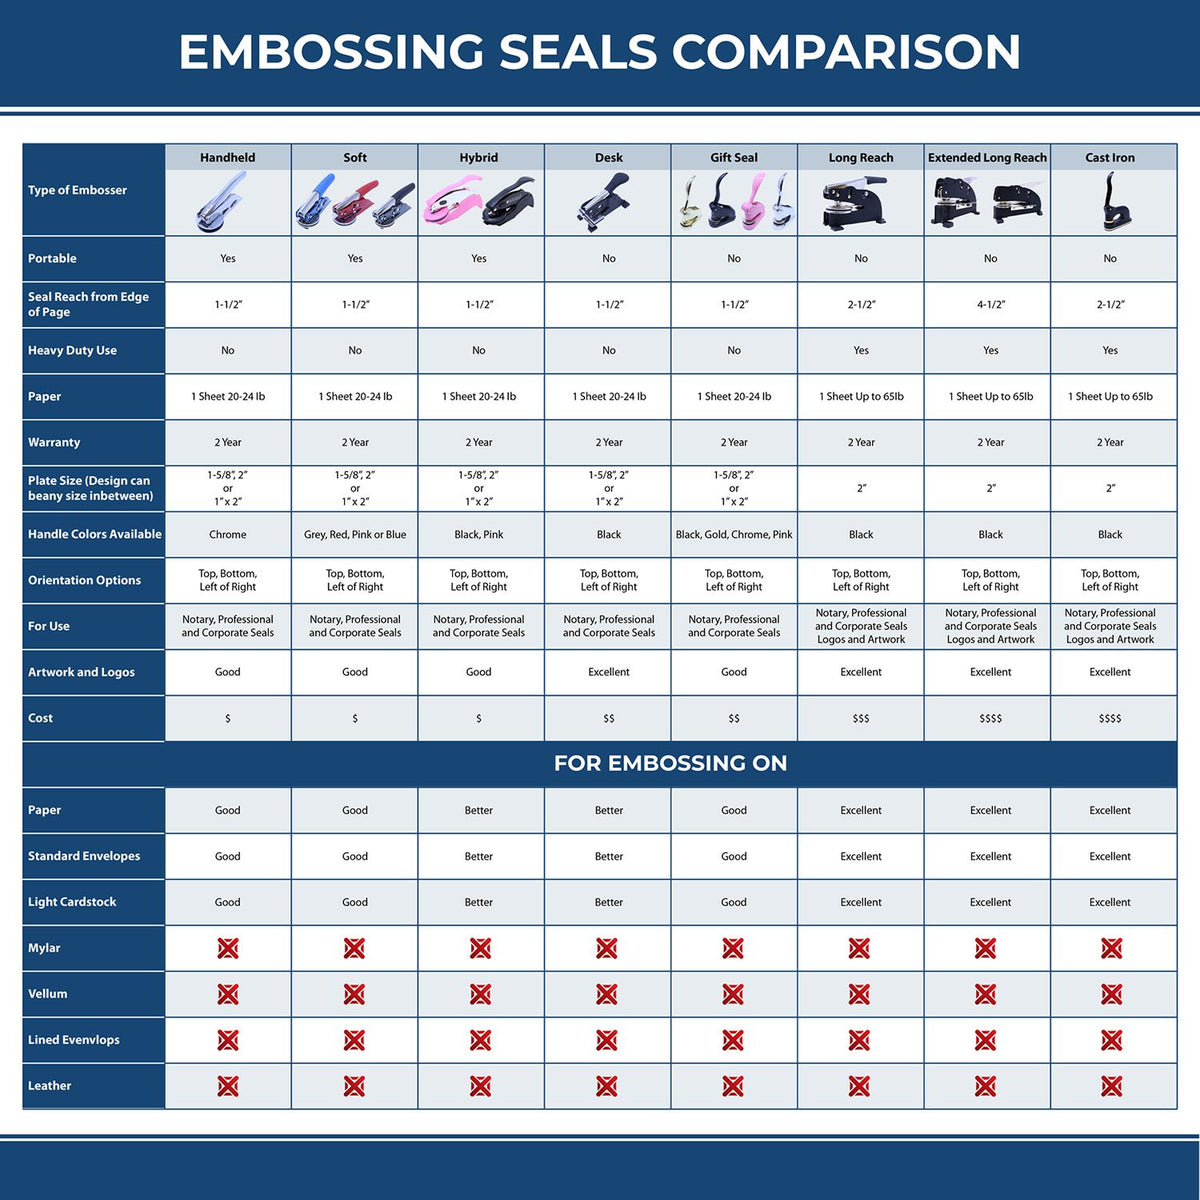 A comparison chart for the different types of mount models available for the Hybrid Maryland Geologist Seal